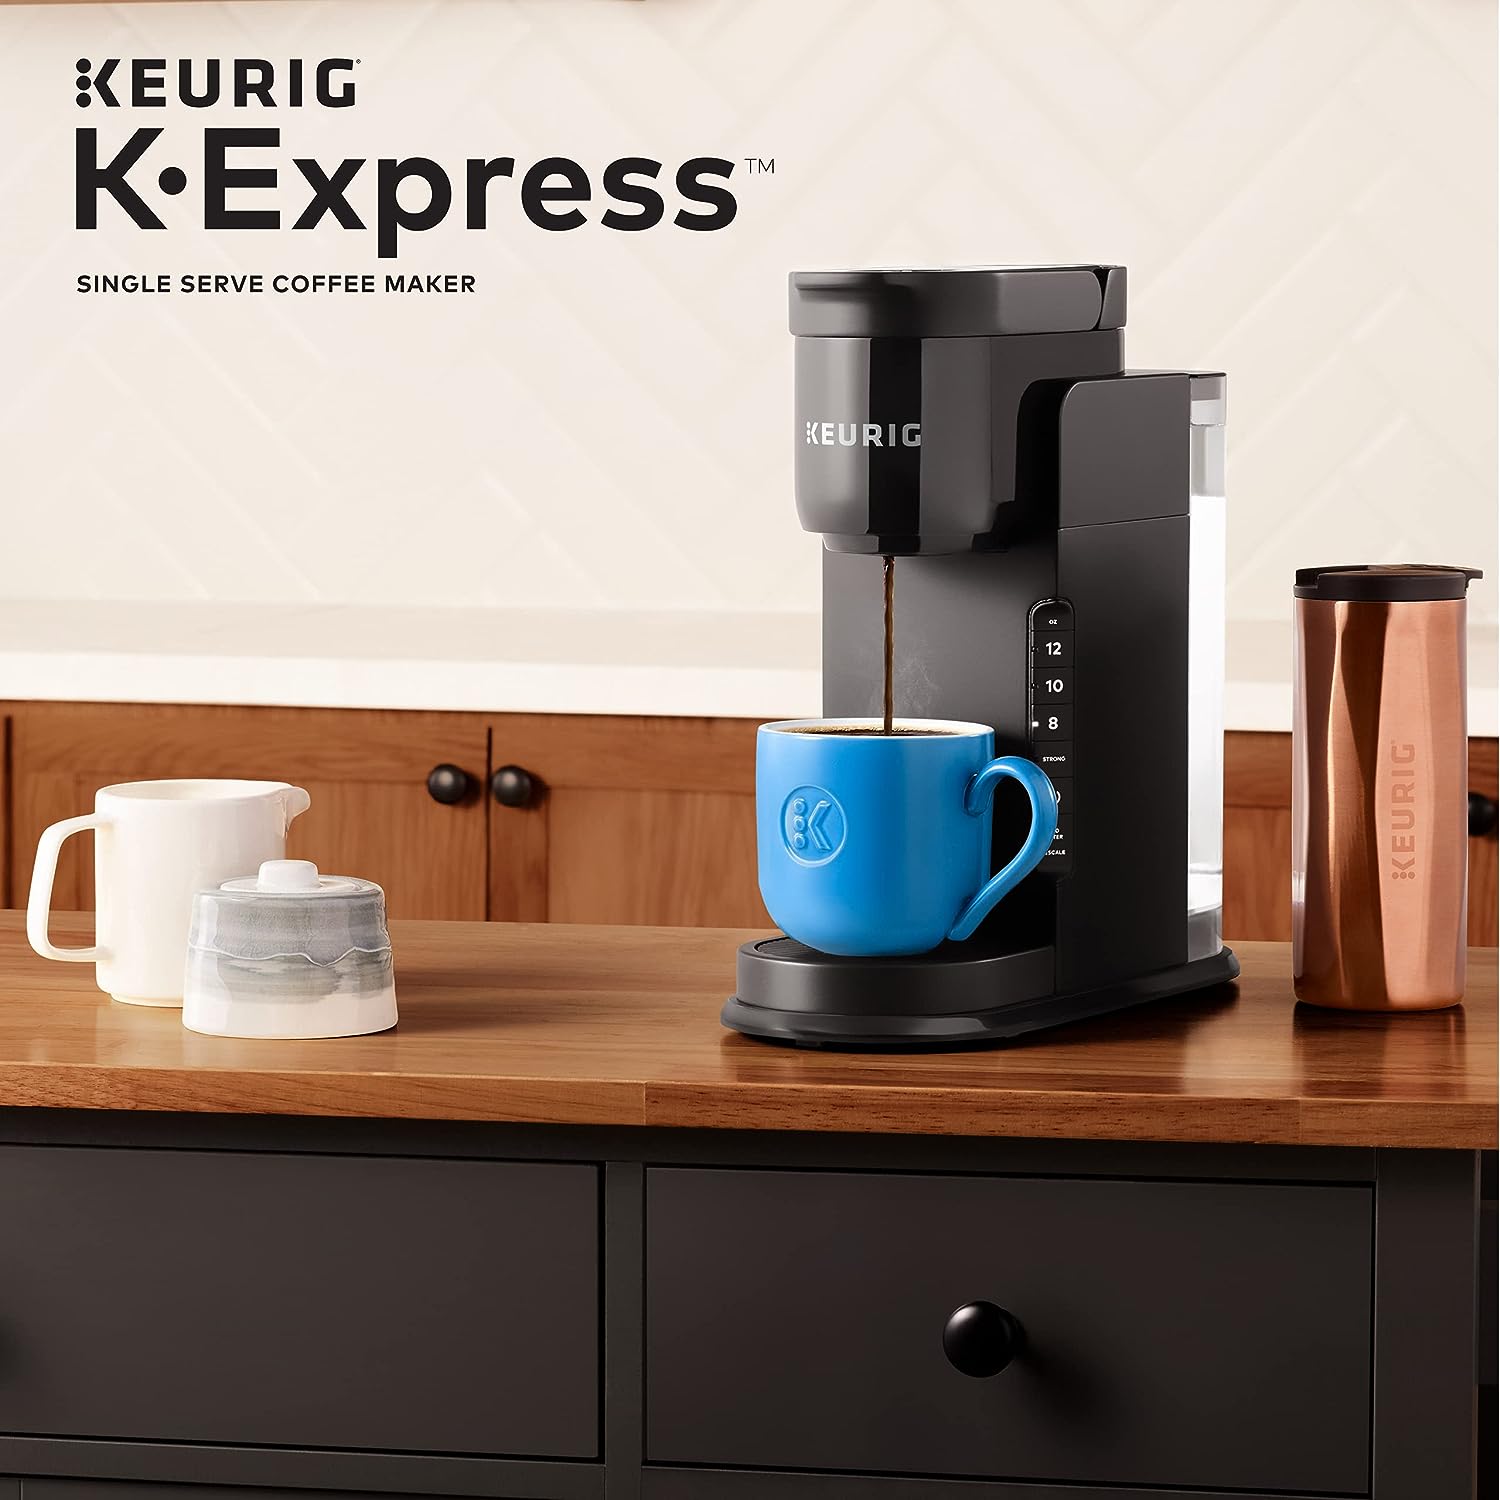 Keurig K-Express Single Serve K-Cup Pod Coffee Brewer $79.49 Shipped Free (Reg. $90) –  Brew an 8, 10, or 12 oz. cup